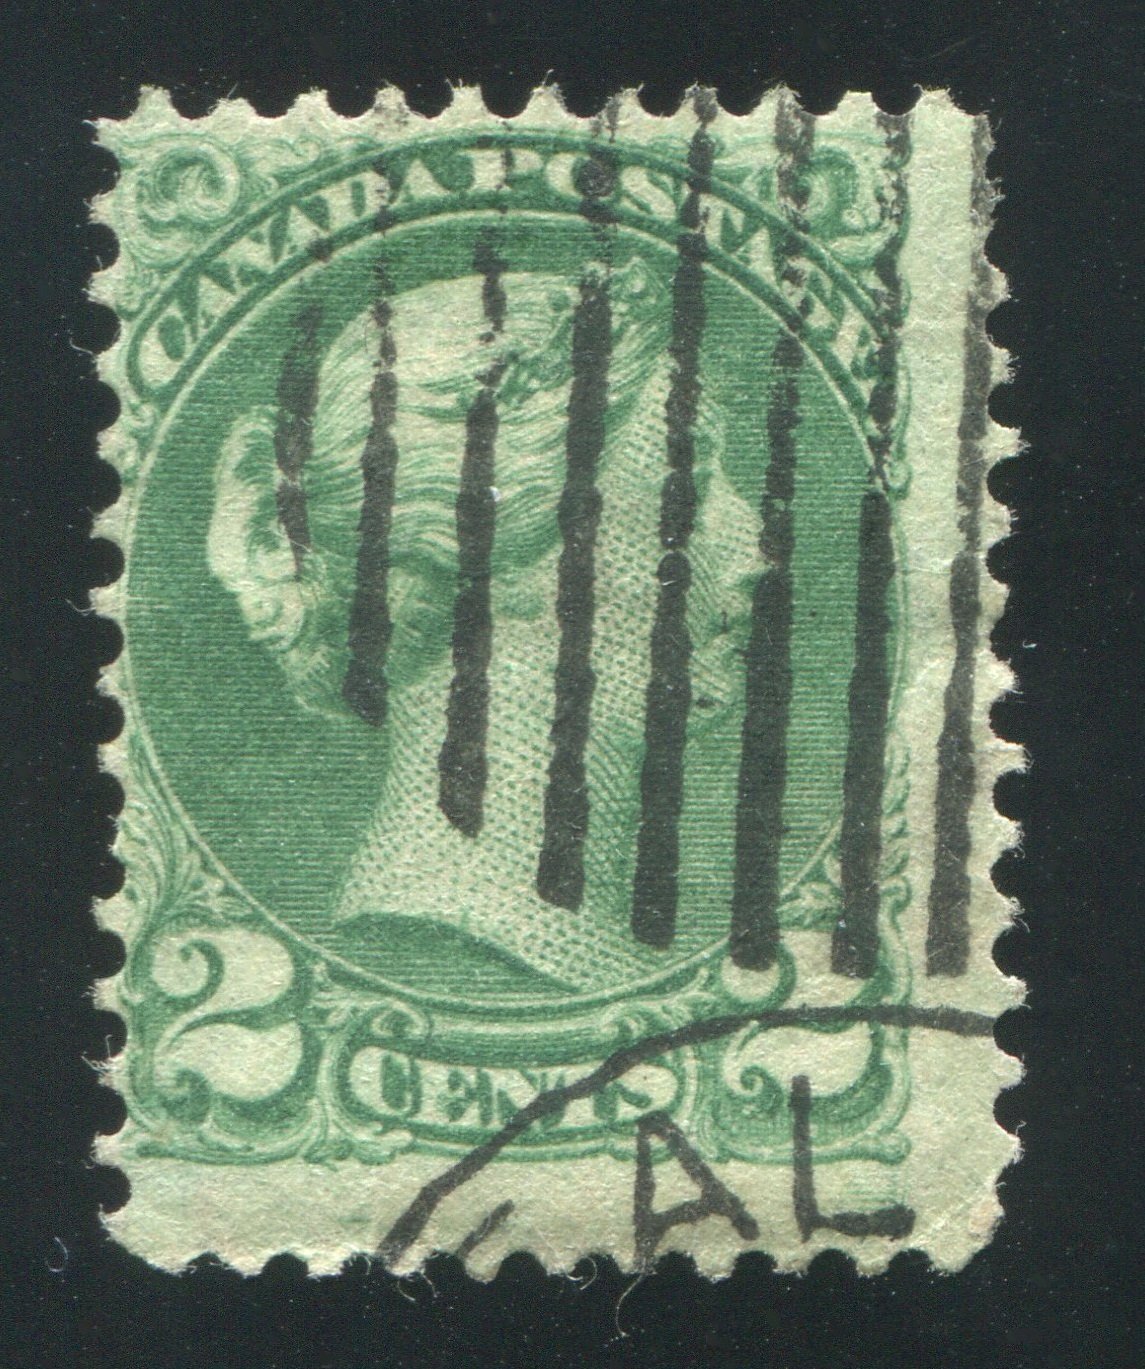 0036CA1708 - Canada #36iv - Used, Latent Re-Entry